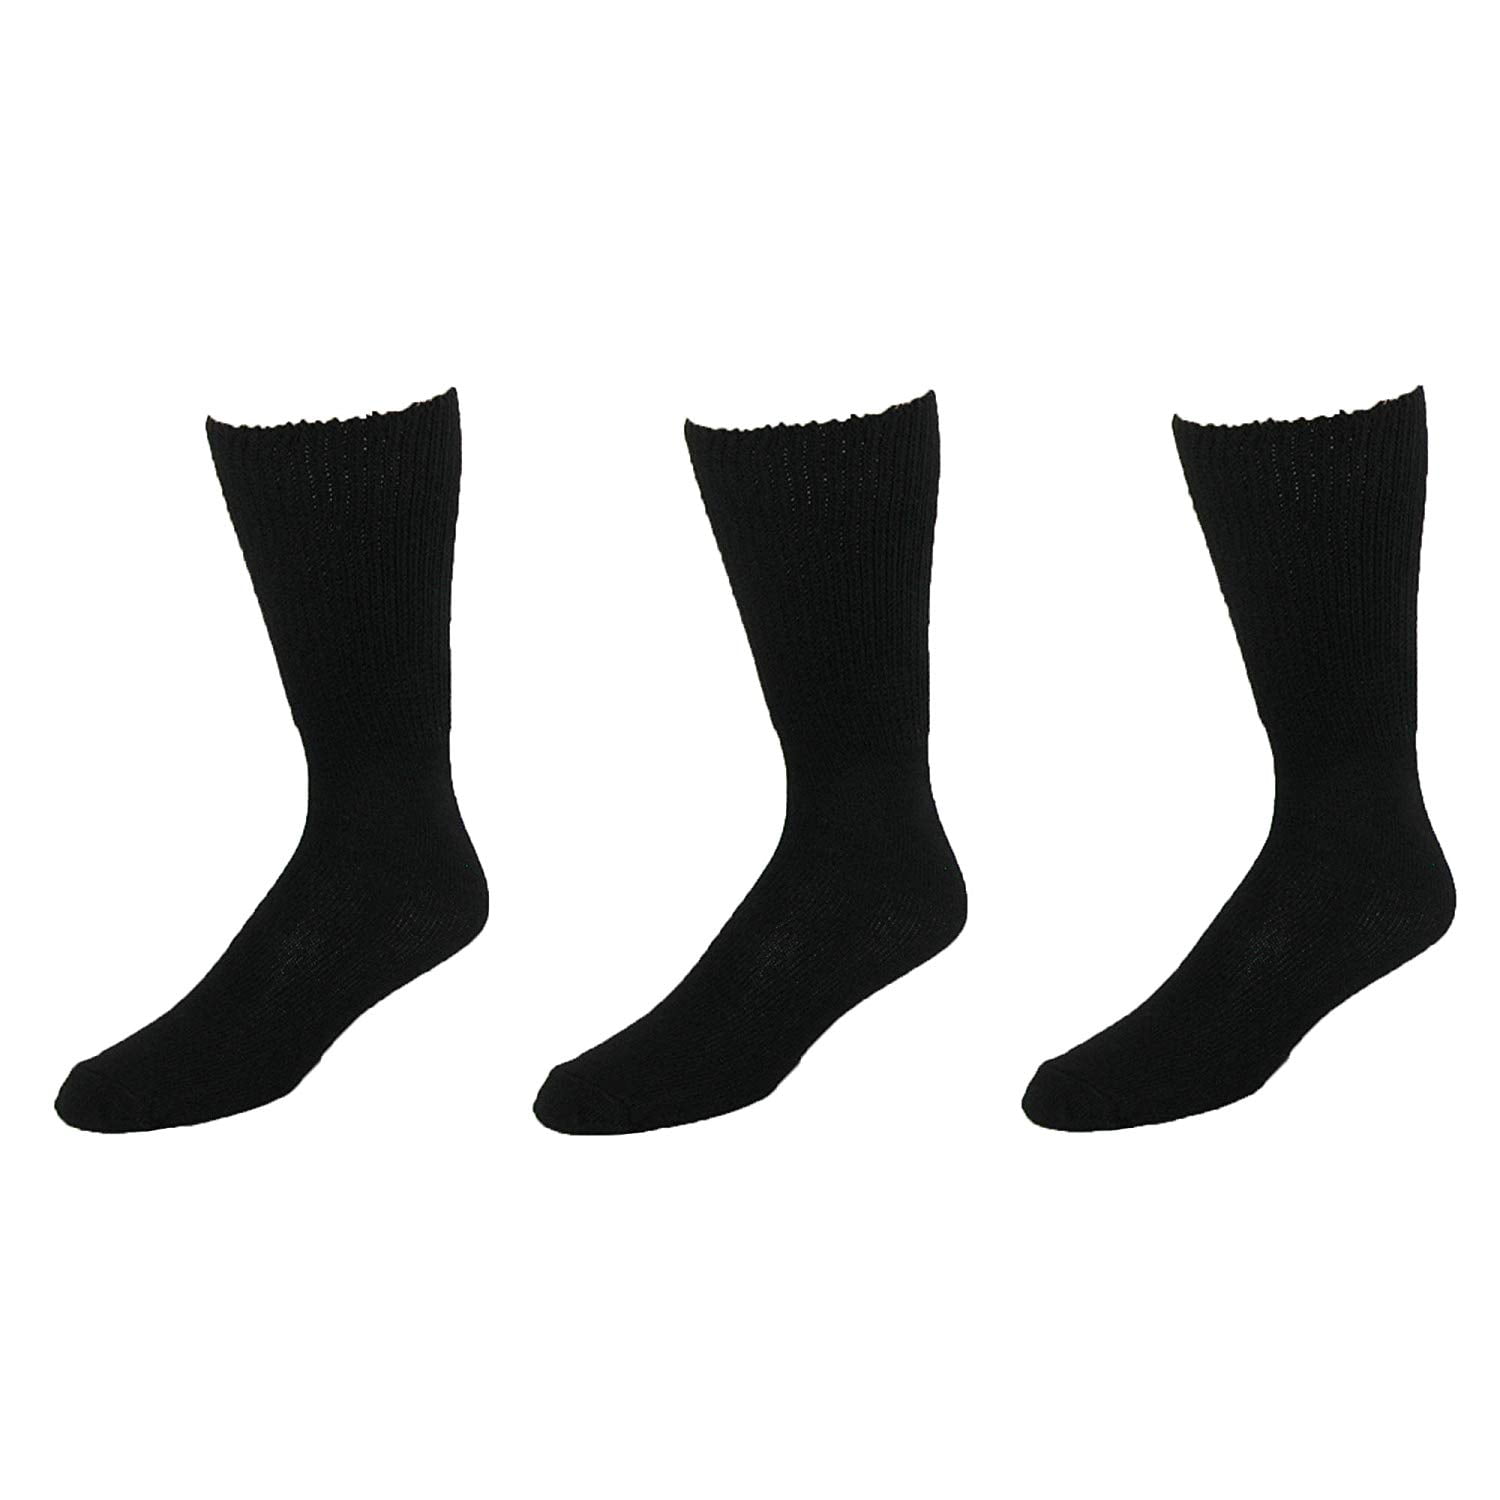 Extra-Wide Tube Socks Black Fit Shoes 9-15 Up to 6E 3-Pair Pack ...